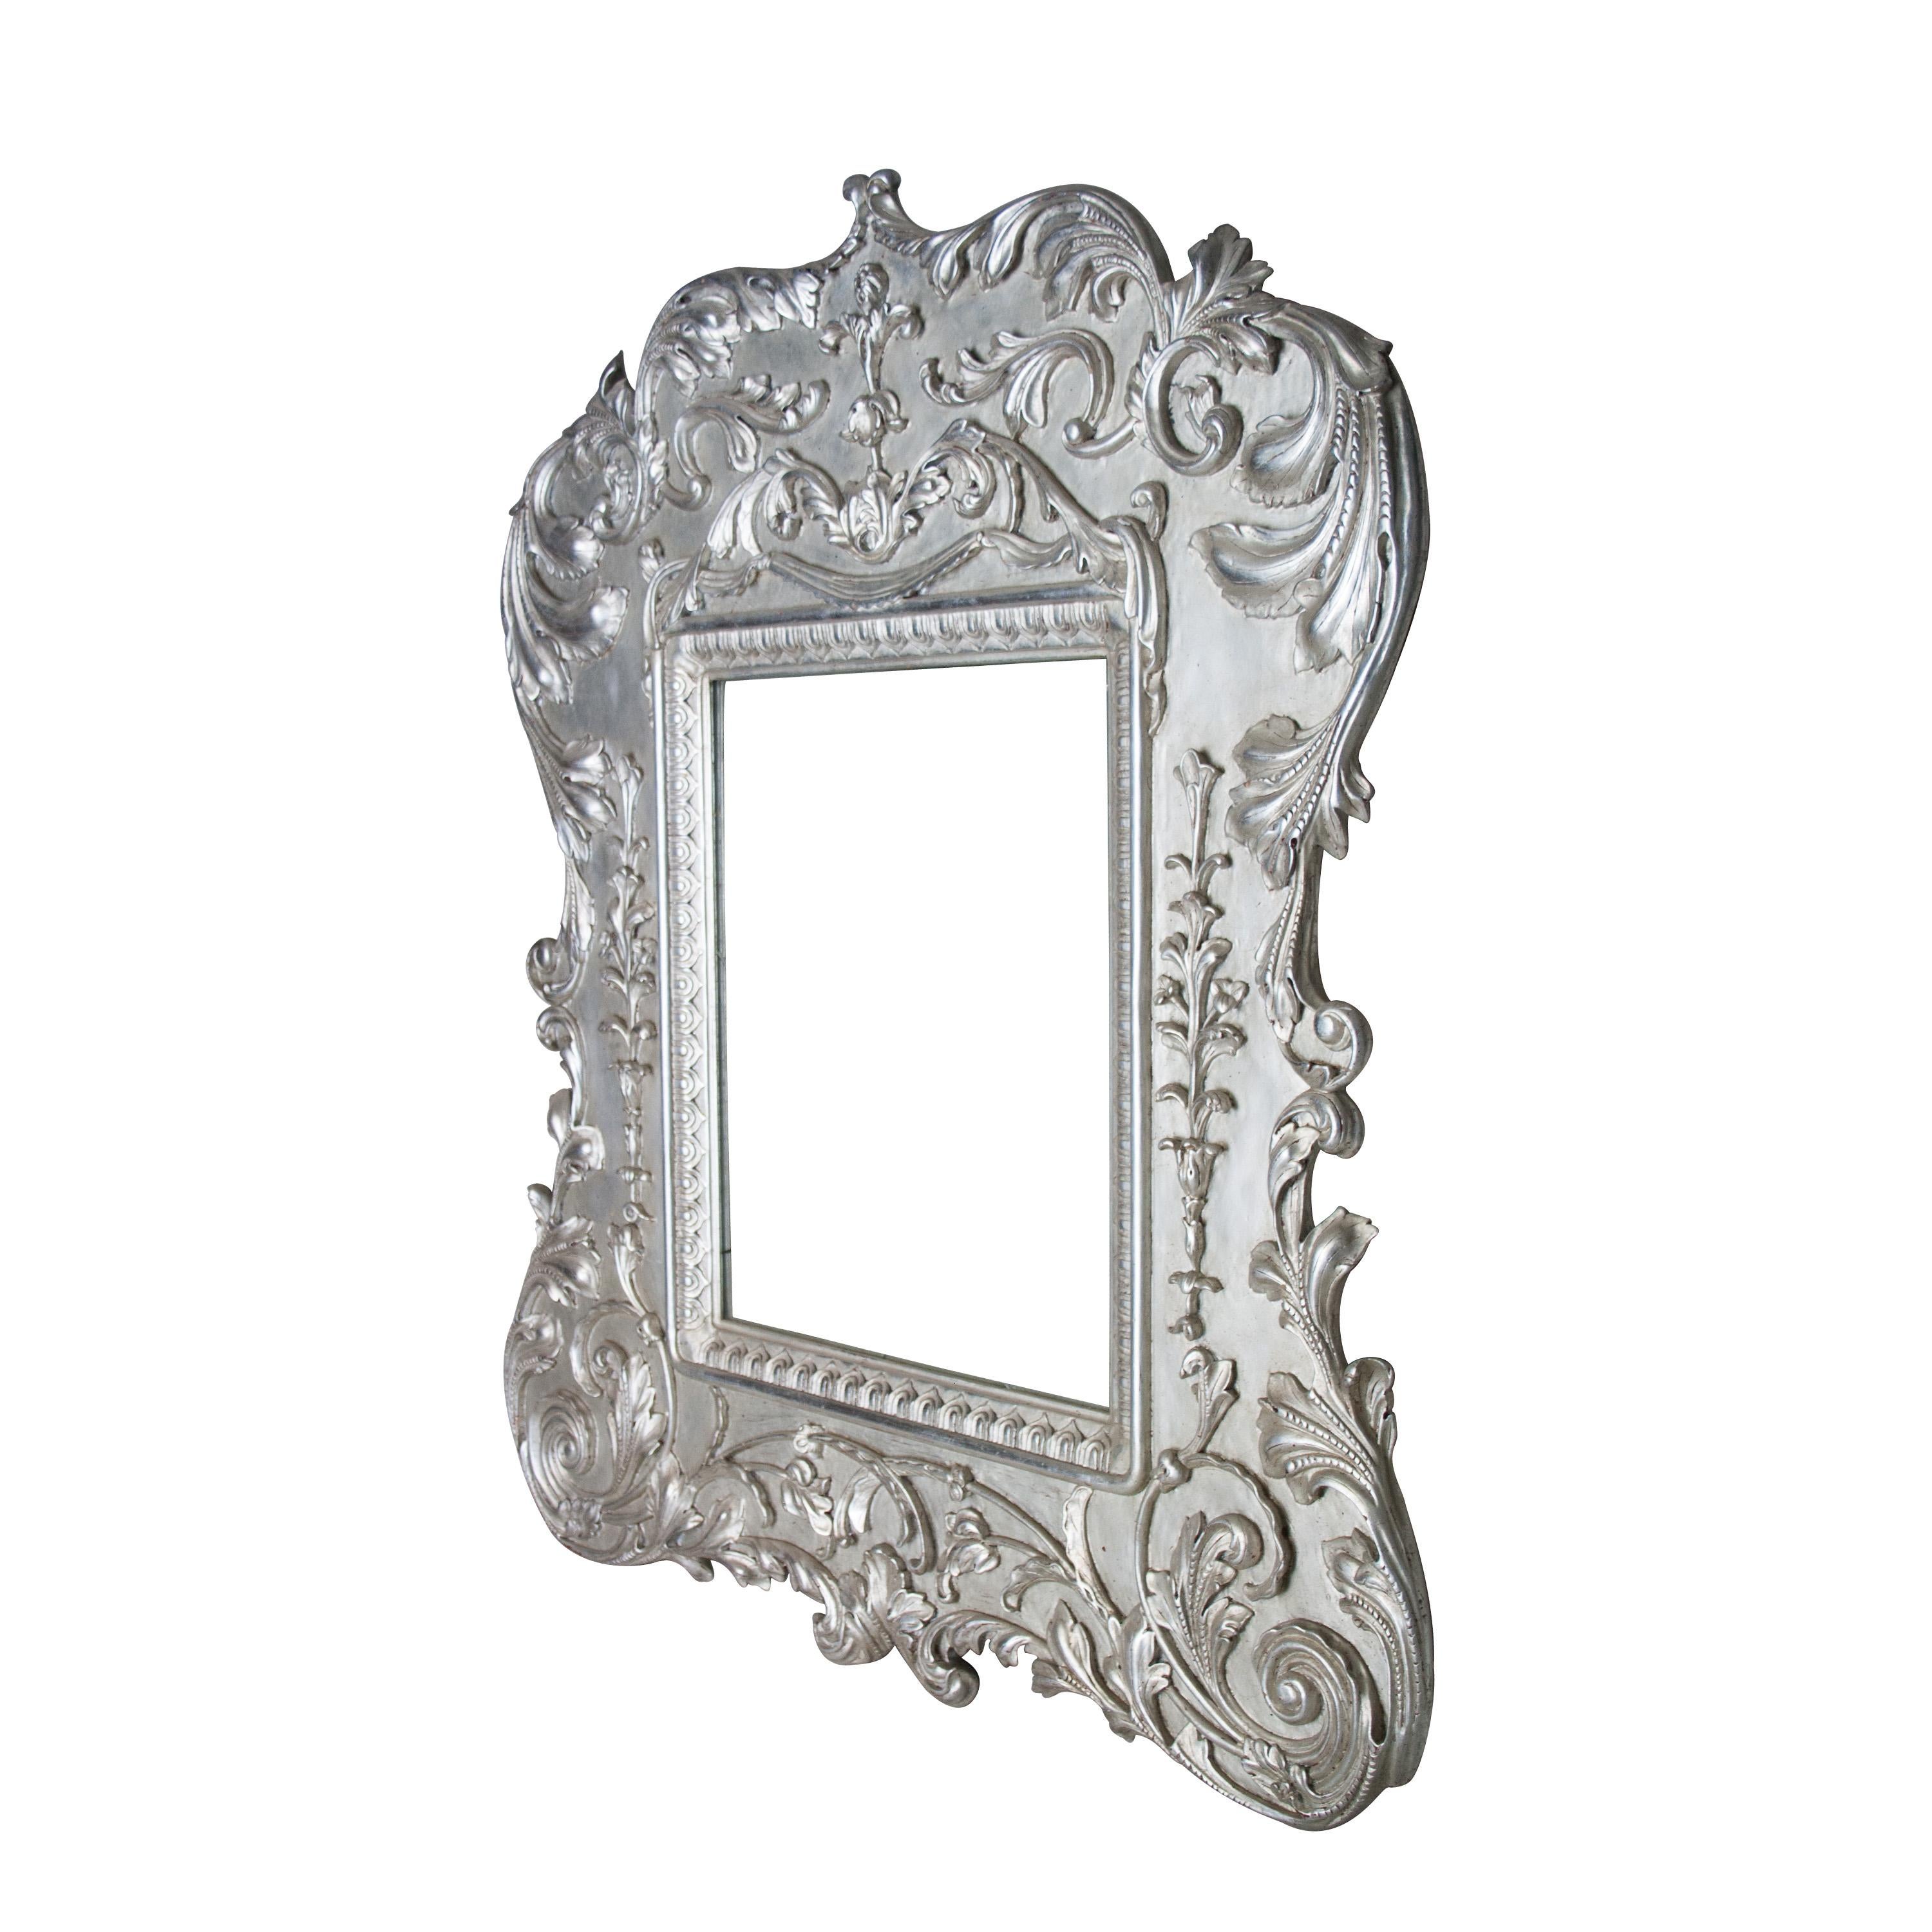 Neoclassical Regency Empire style handcrafted mirror. Hand carved wooden structure with silver foiled finish. Spain, 1970.